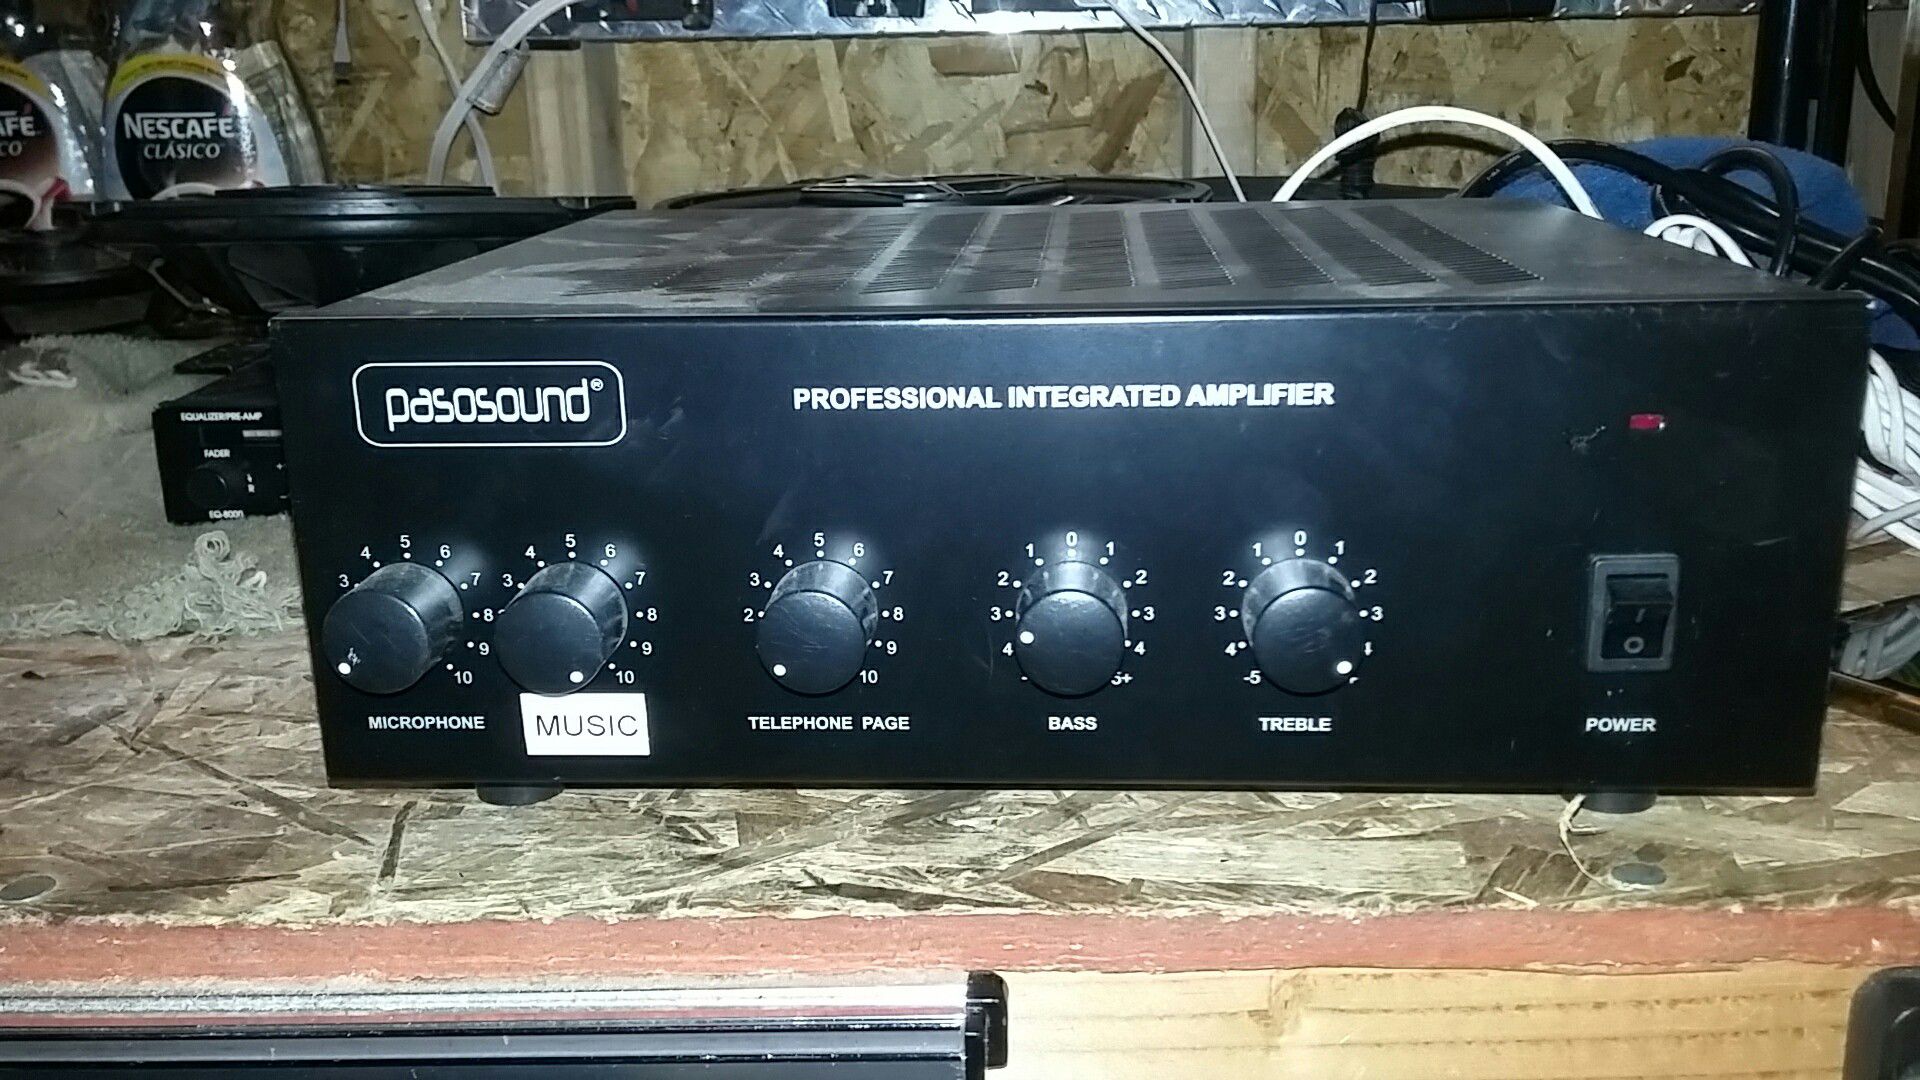 PASO SOUND PROFESSIONAL INTEGRATED AMPLIFIER